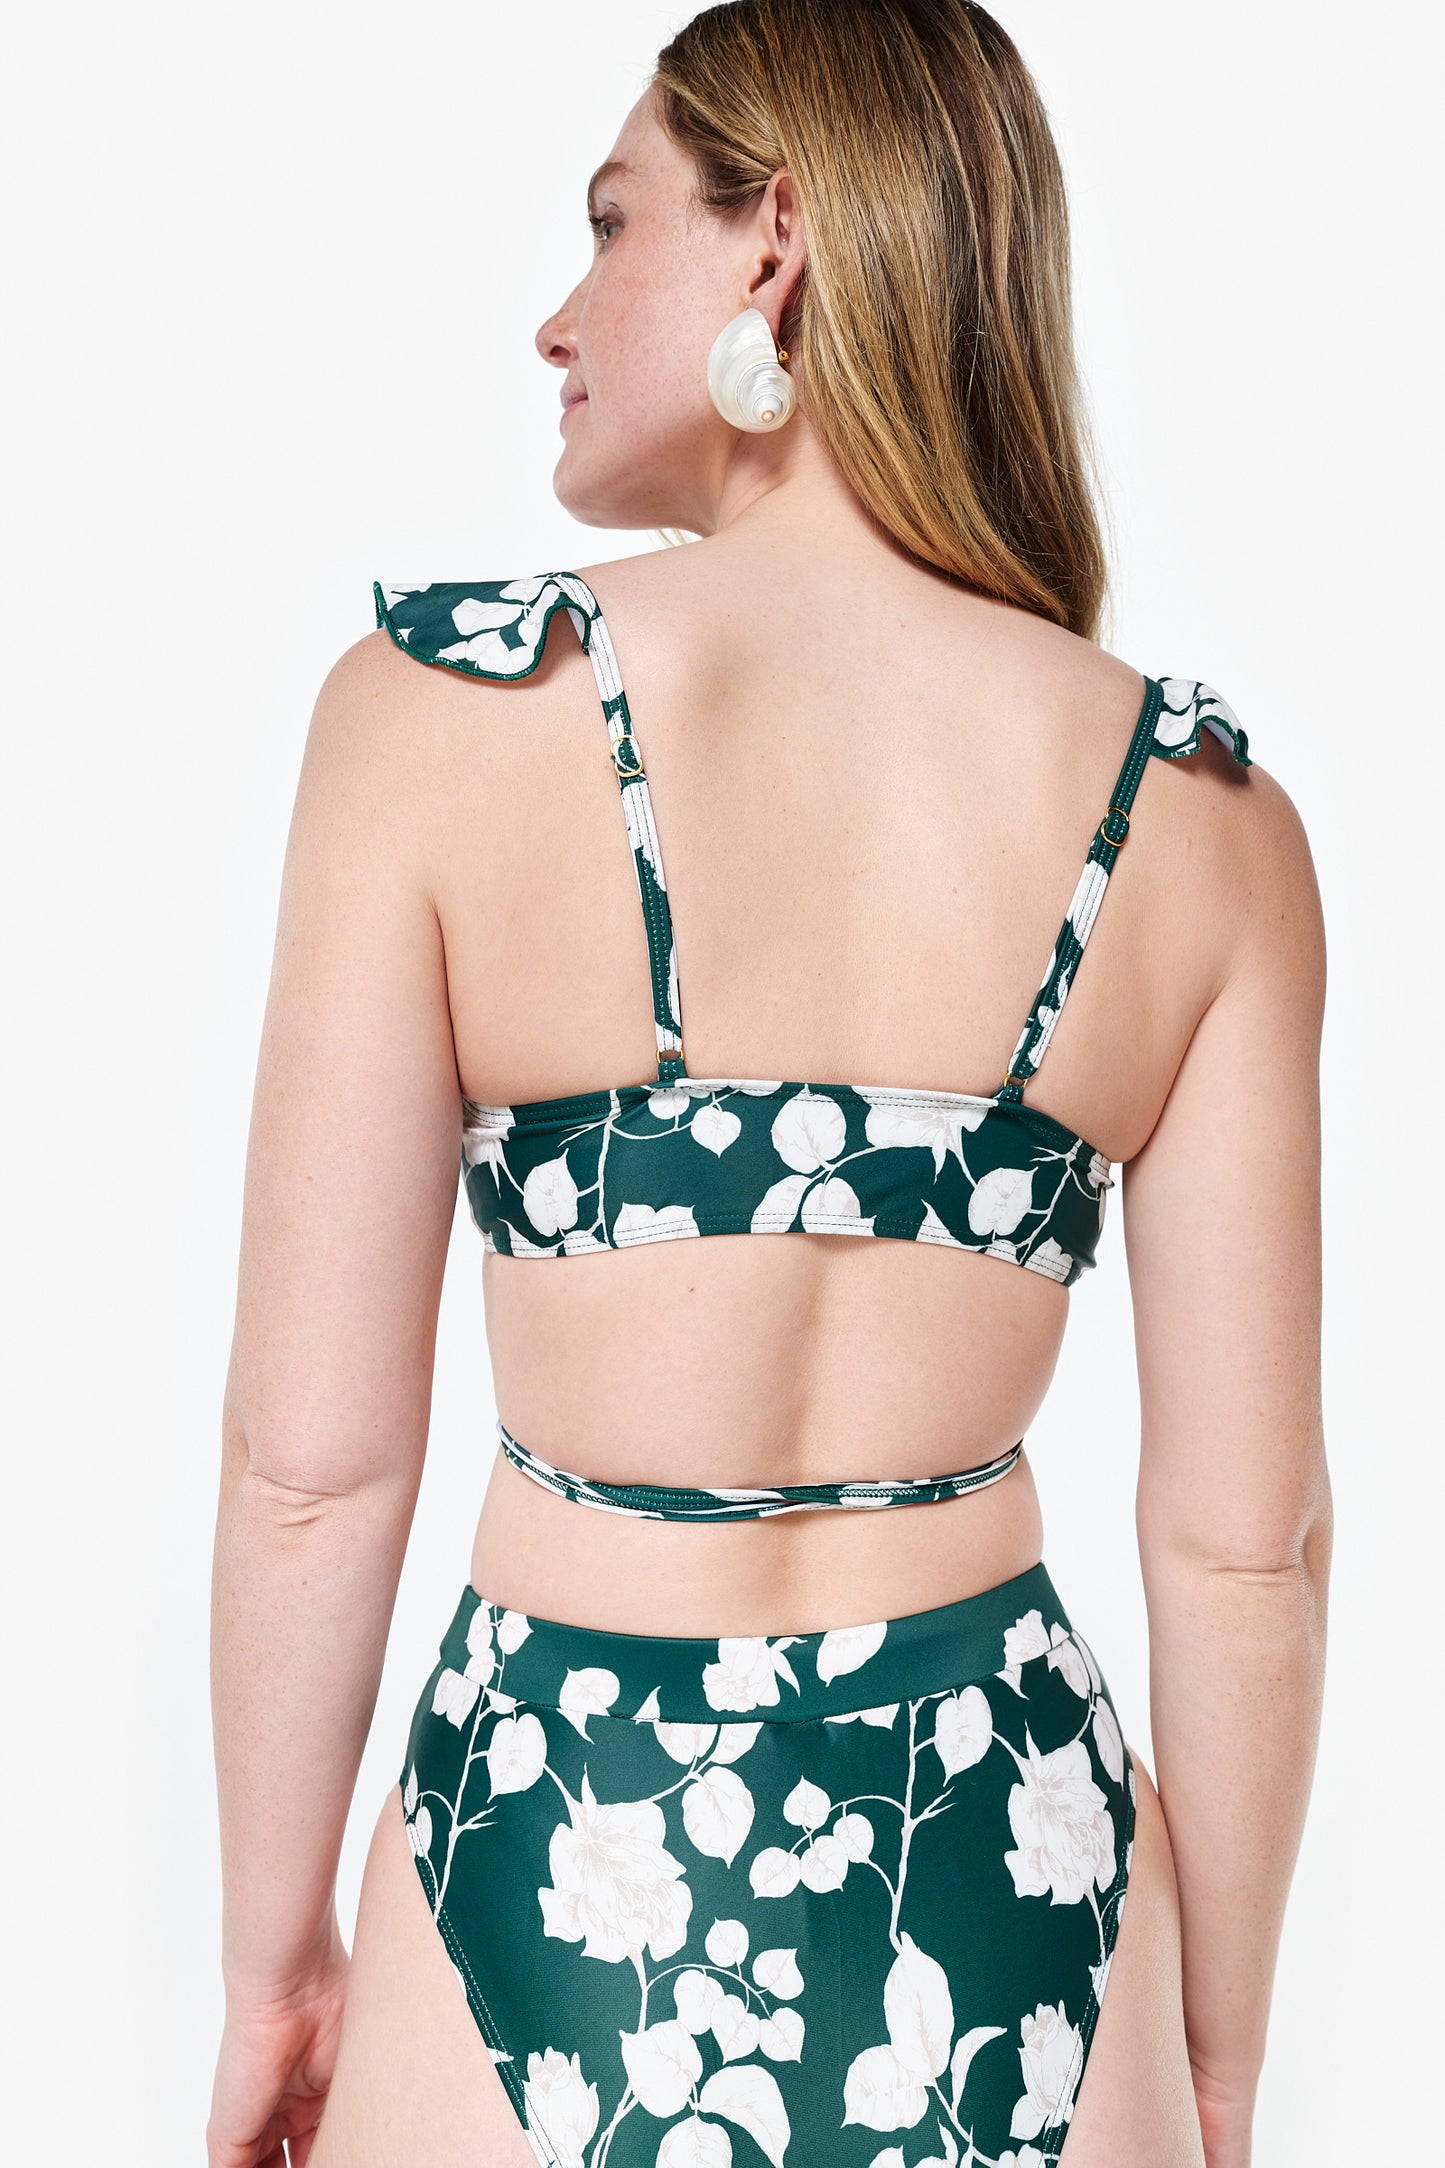 Agee Top in Green Floral